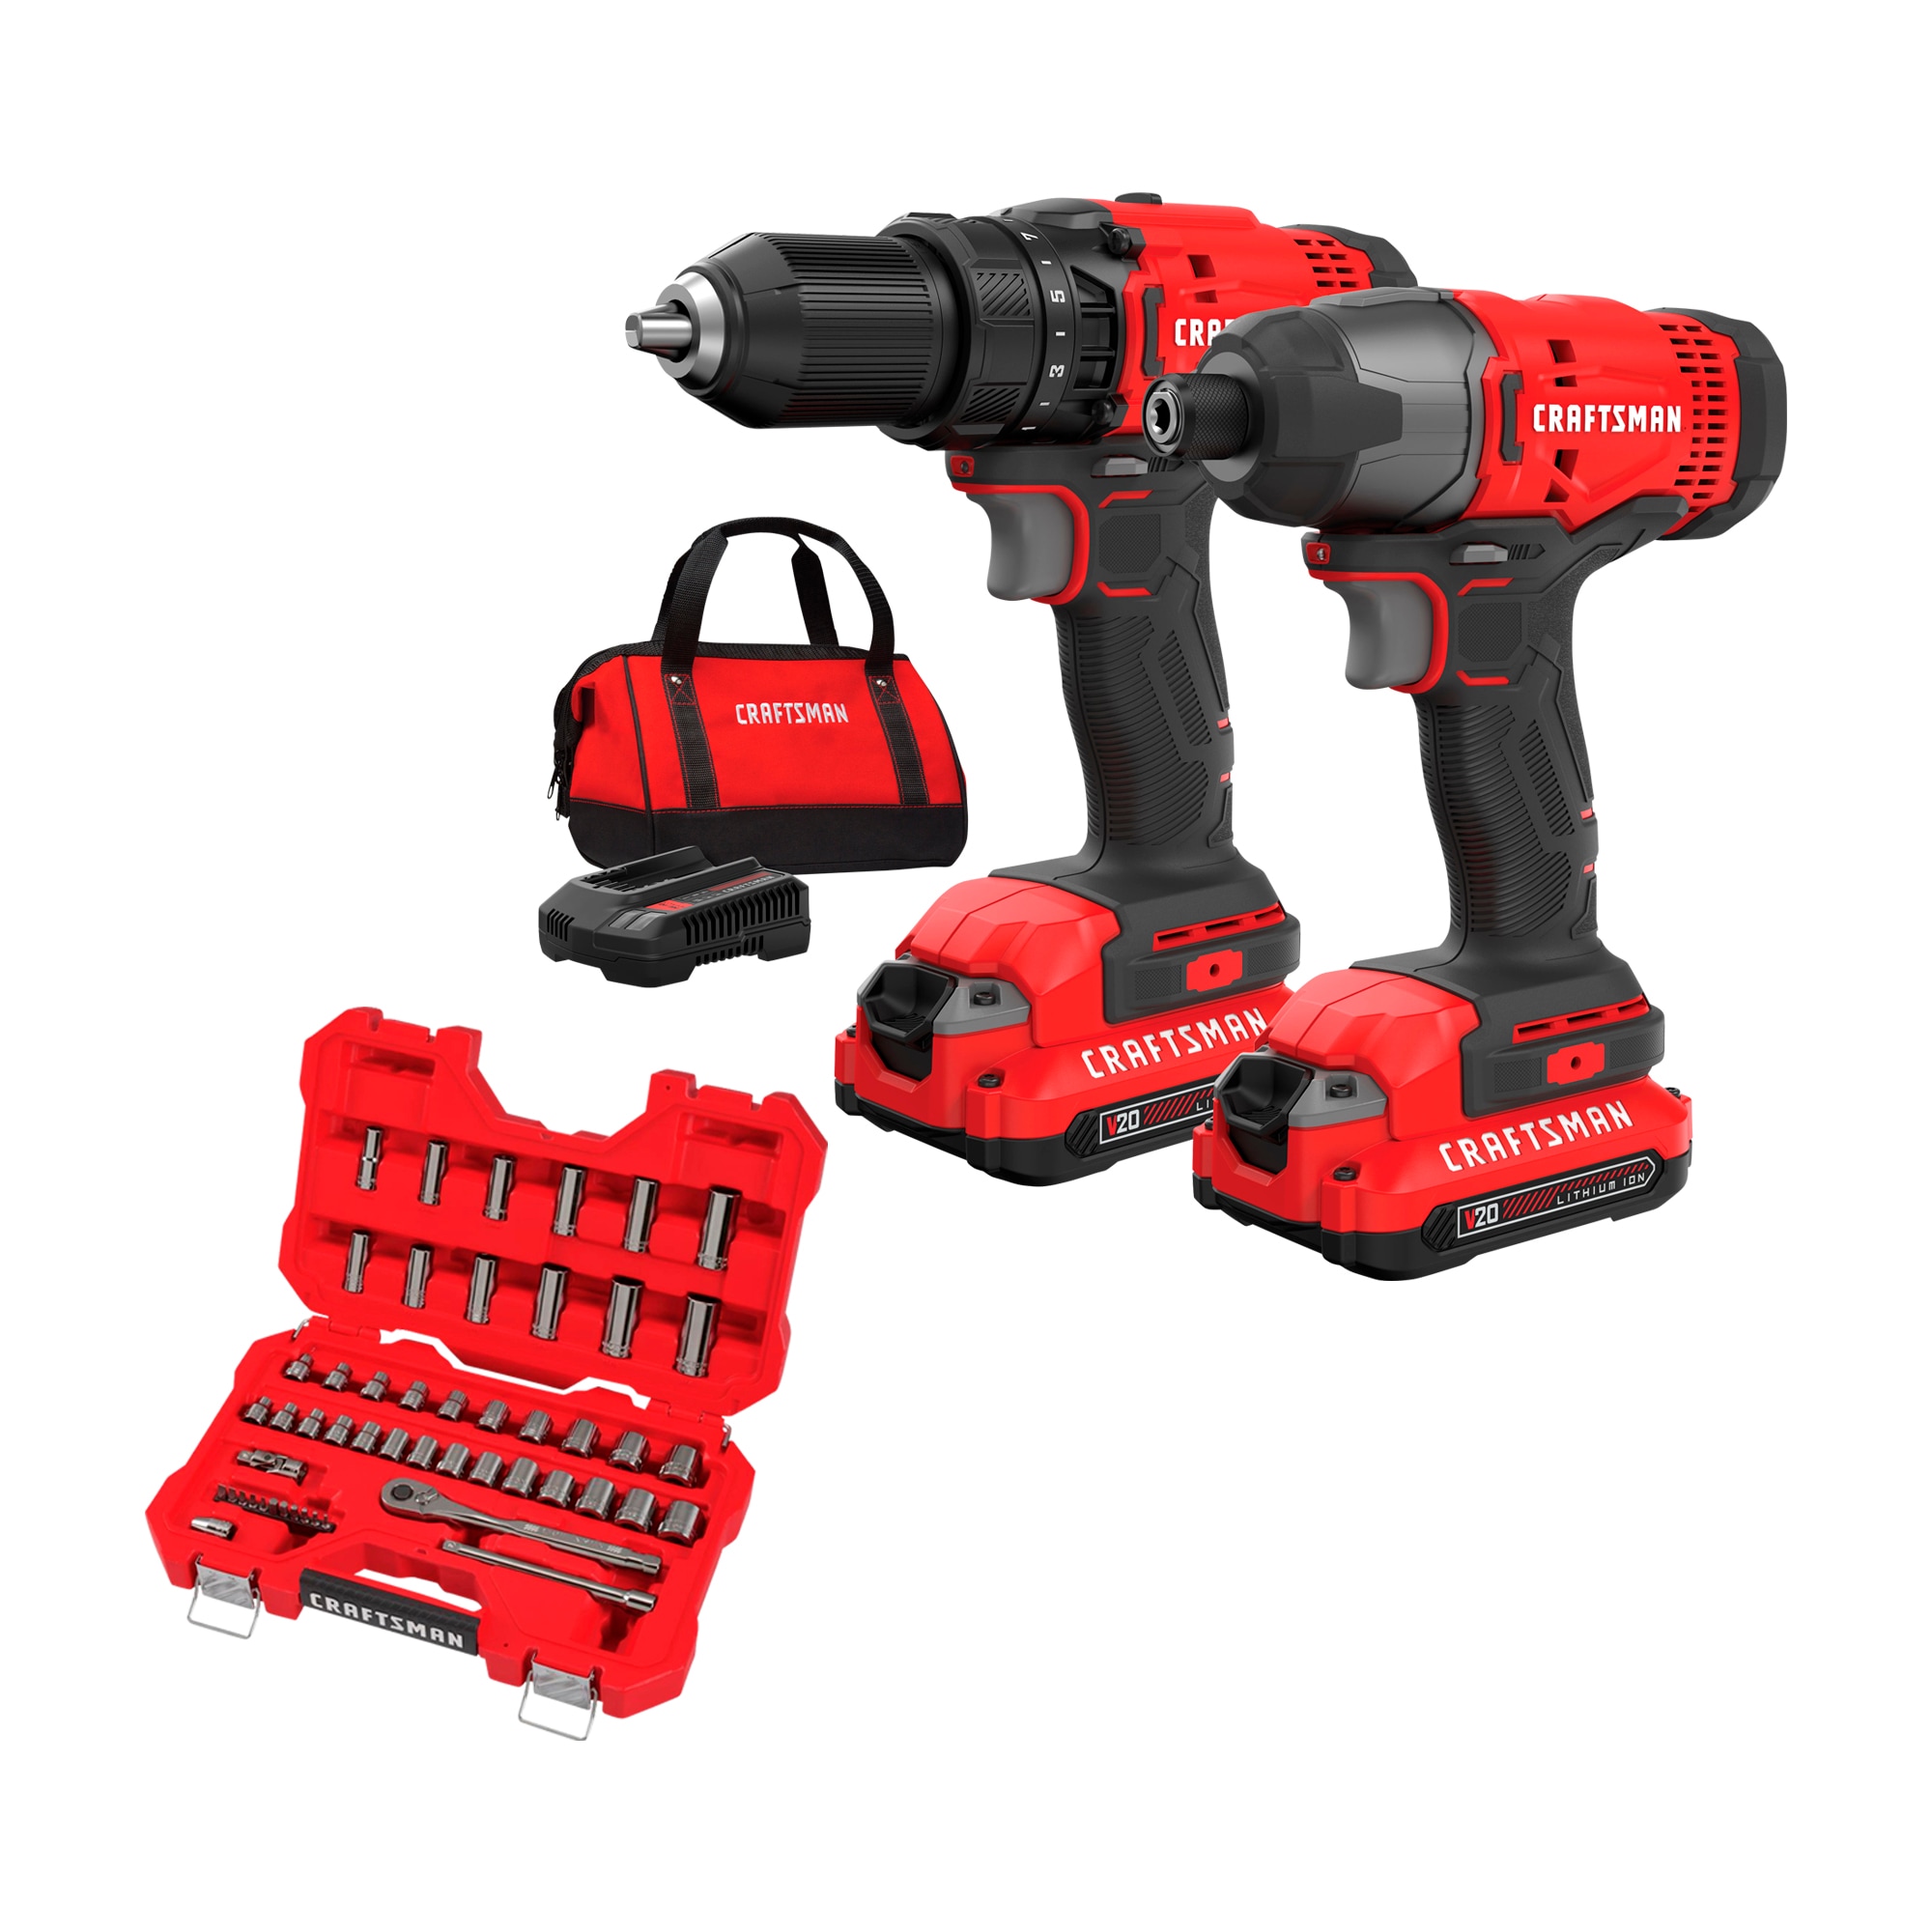 NEW CRAFTSMAN V20 2-Tool 20-Volt Max Power Tool Combo Kit Bundle with Soft Case 